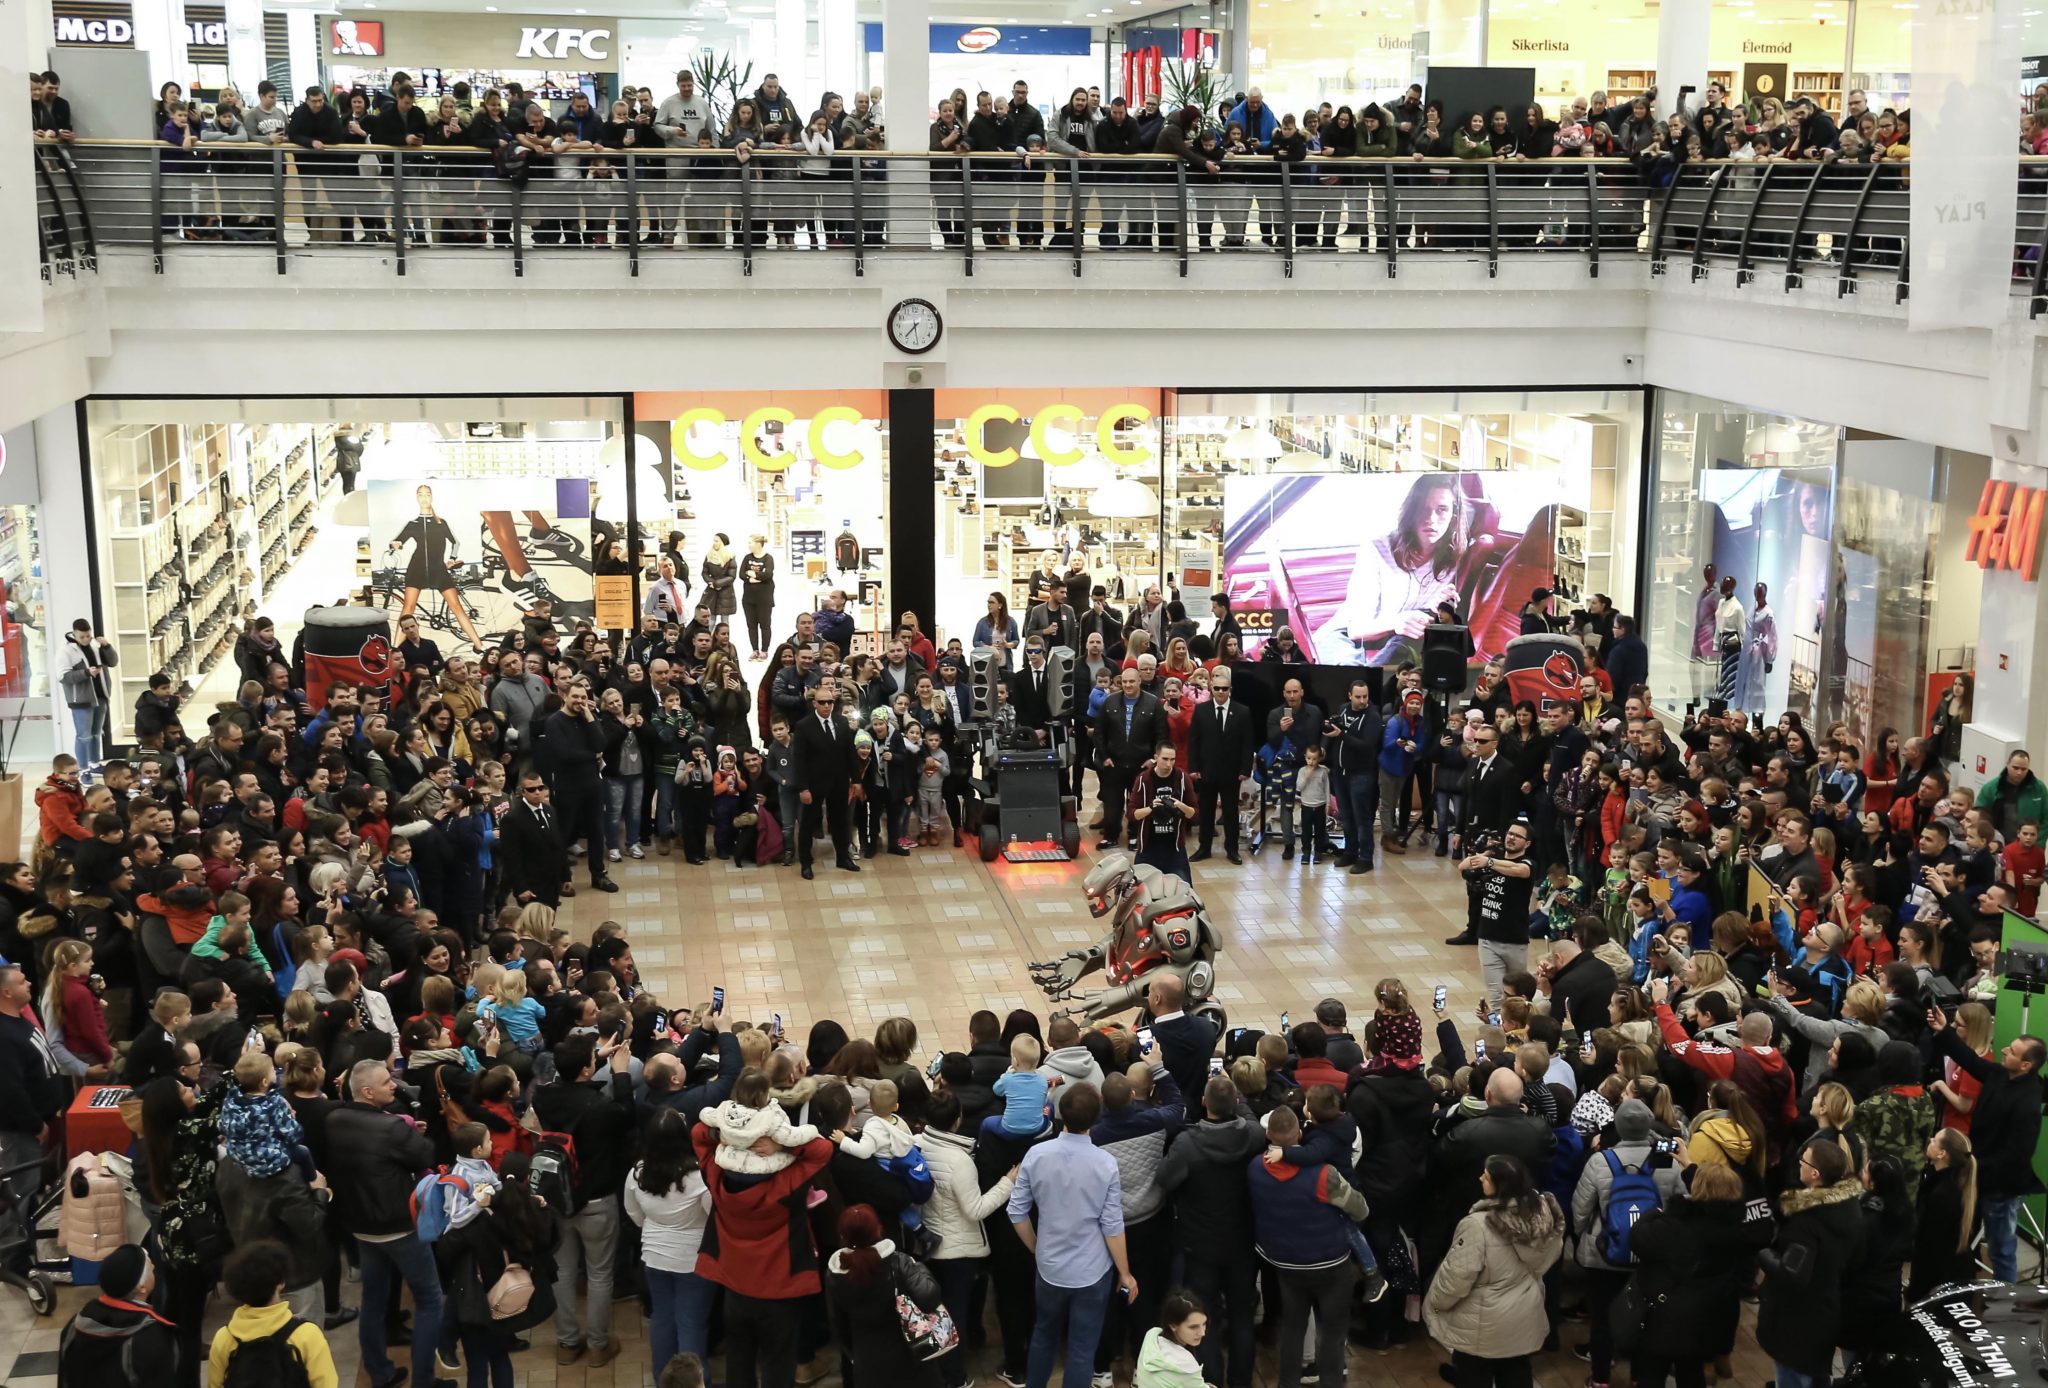 Titan the Robot with a huge crowd at a shopping mall in Budapest, Hungary.